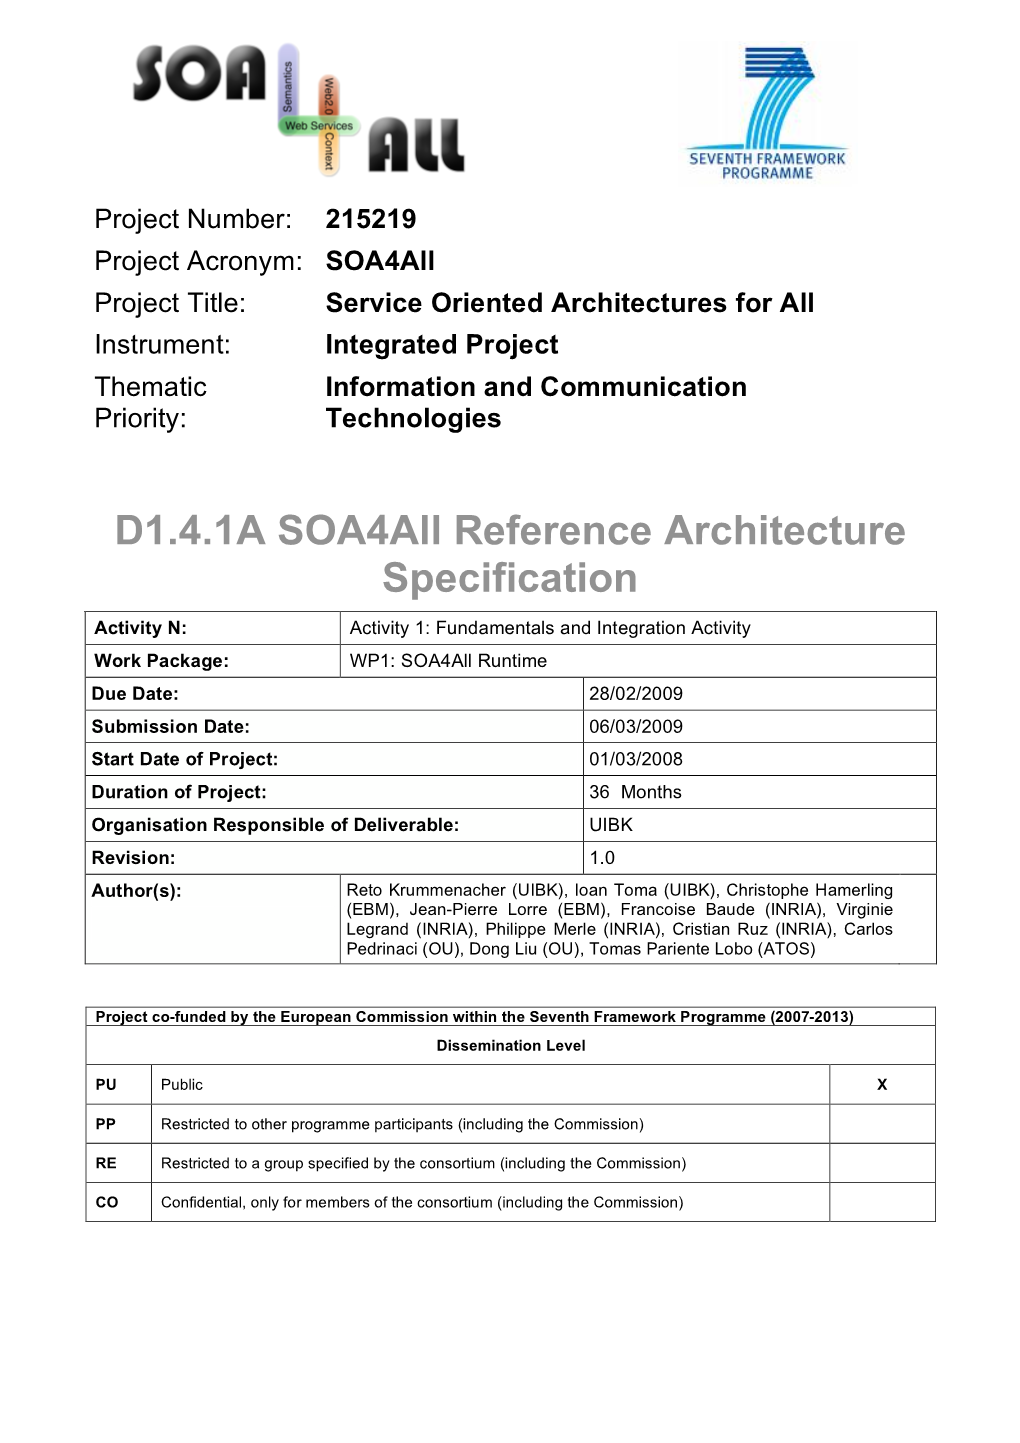 D1.4.1A Soa4all Reference Architecture Specification